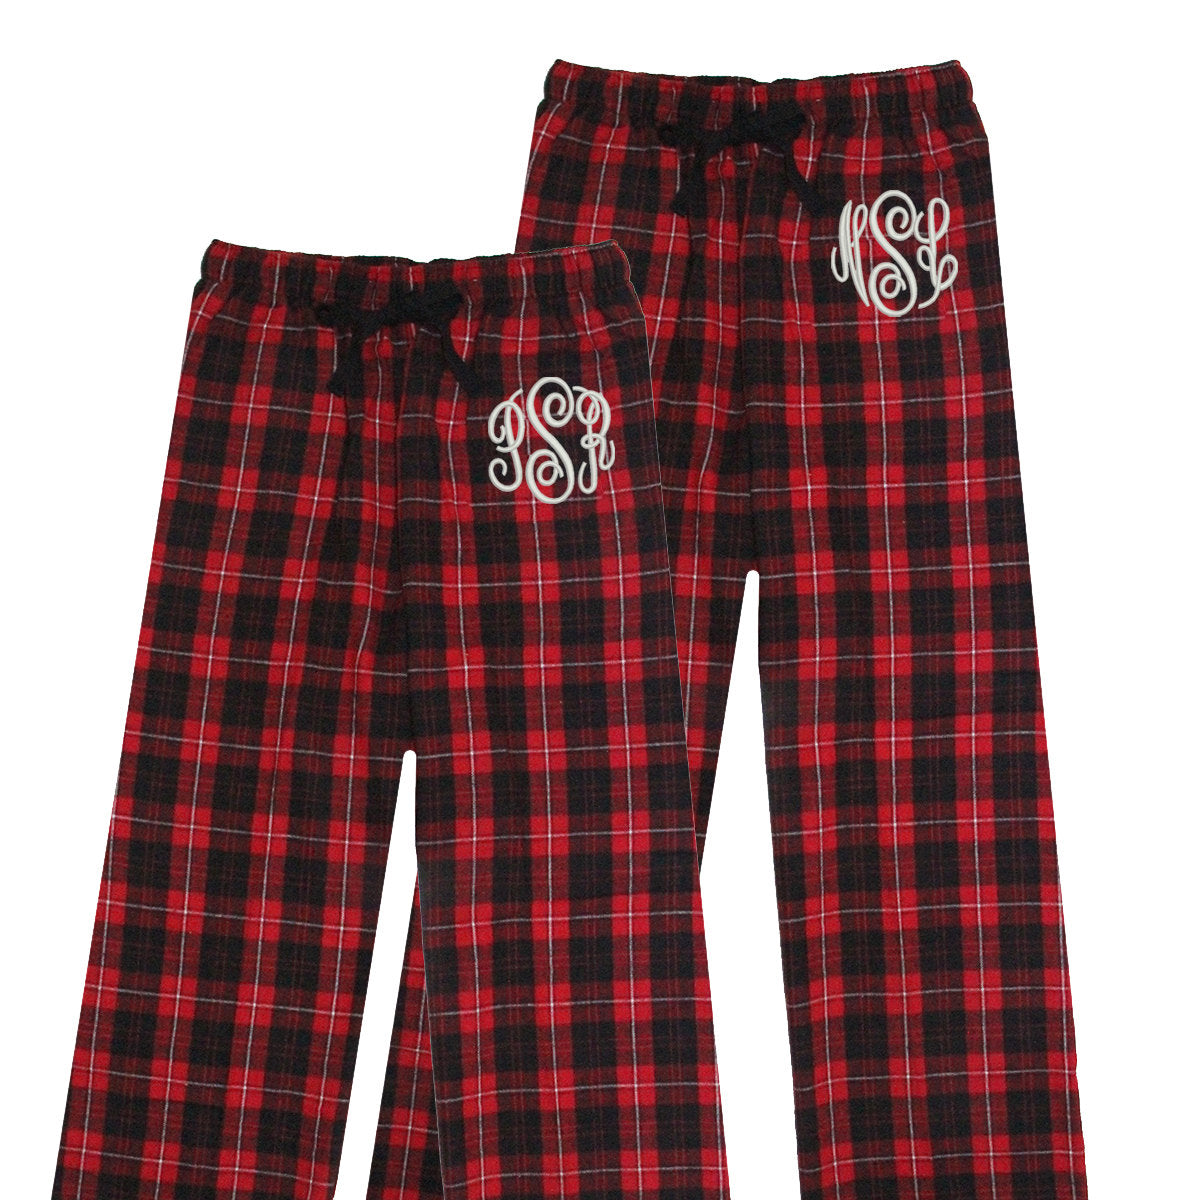 Cotton Sisters Monogrammed Flannel Matching Family Pajama Set - Classic Monogram